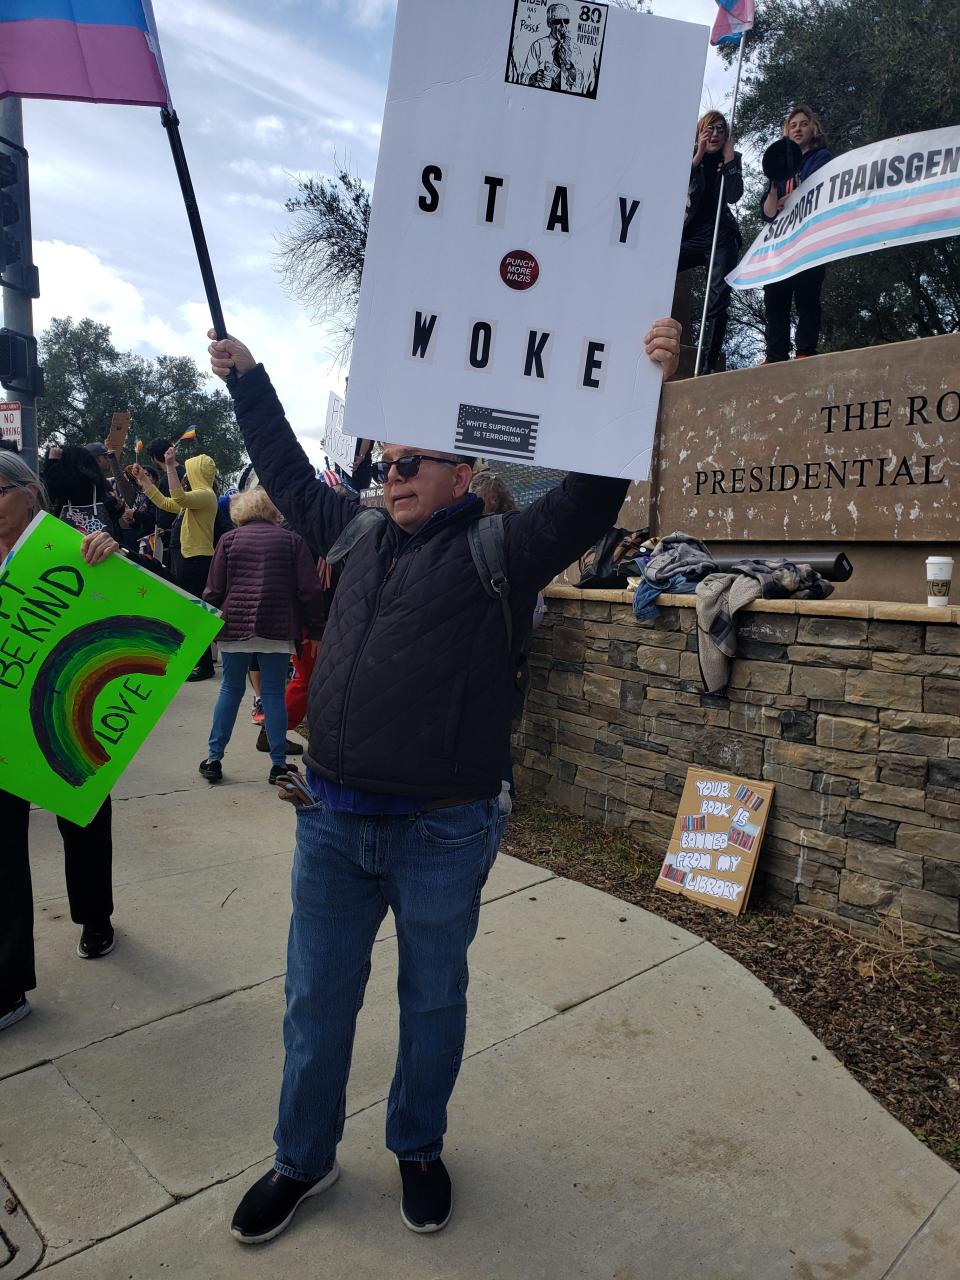 More than 100 people gathered in front of the Ronald Reagan Presidential Library in March to protest Florida Gov. Ron DeSantis. Protesters are expected at the presidential primary debate on Wednesday at the library.